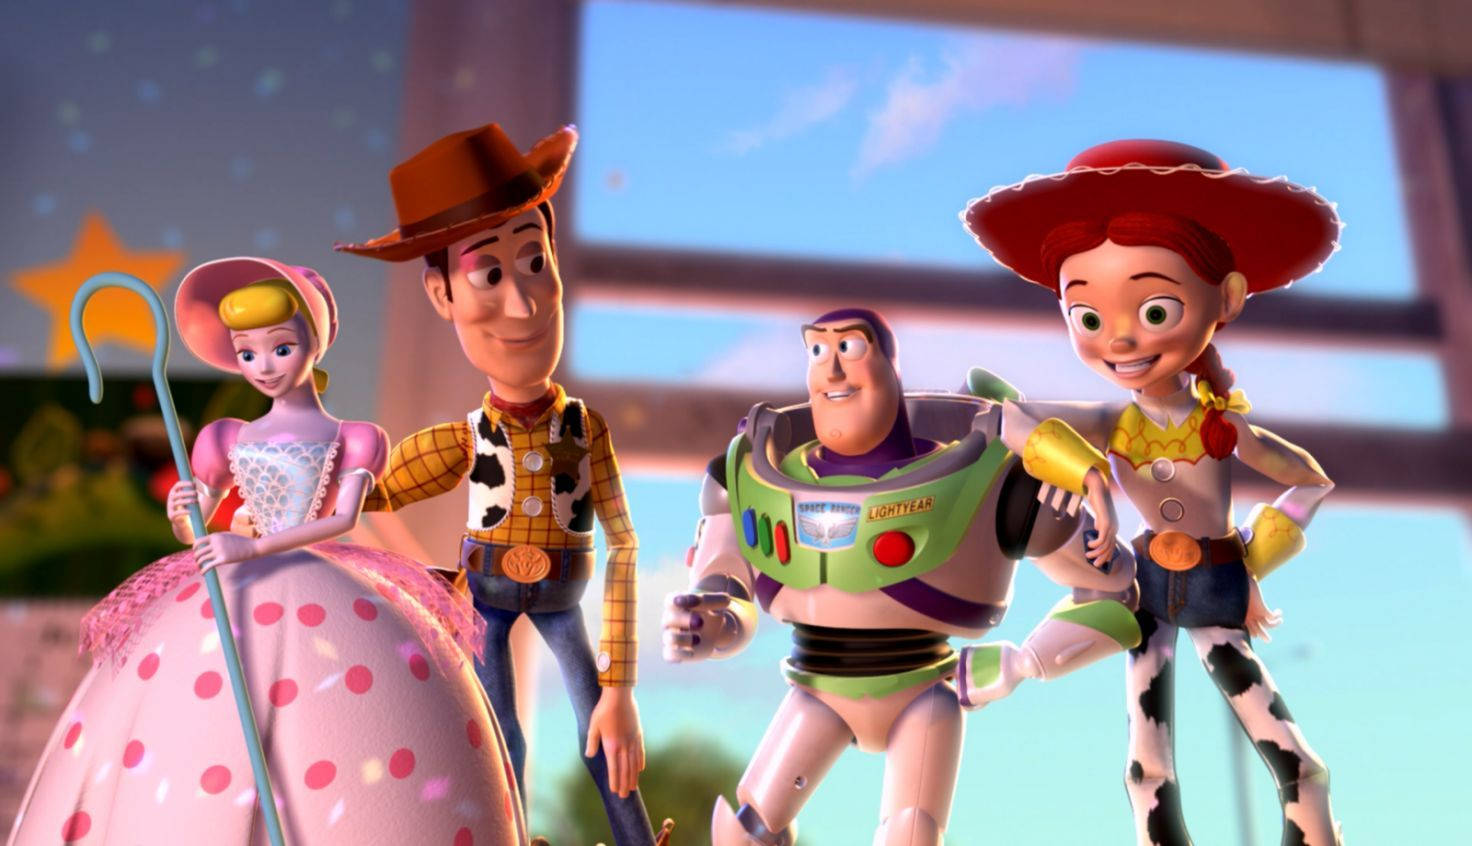 Toy Story Couple Partners Wallpaper